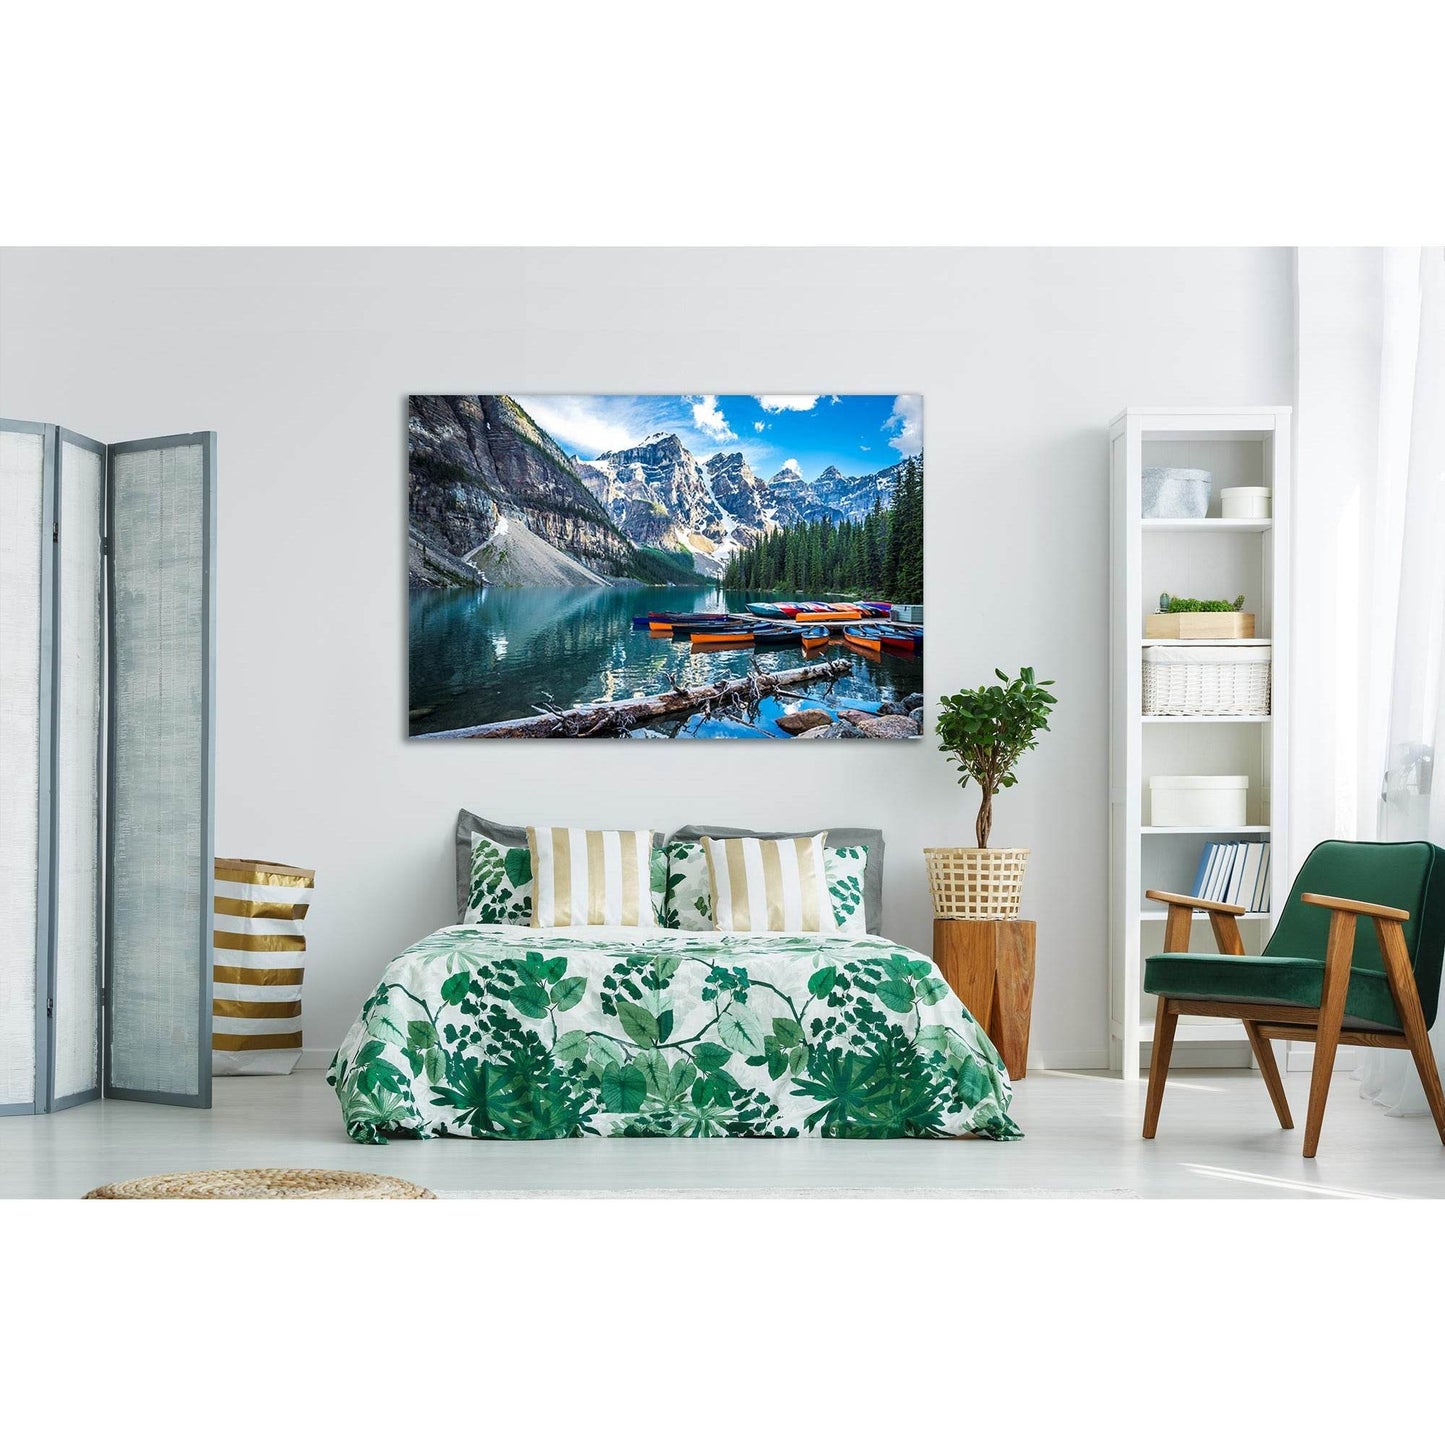 Rocky Mountains and Lake Wall Decor: An Inspiring Office AdditionThis canvas print captures the breathtaking beauty of Lake Moraine with its crystal-clear waters and majestic mountain backdrop. The vibrant blues and natural greens make it a perfect piece